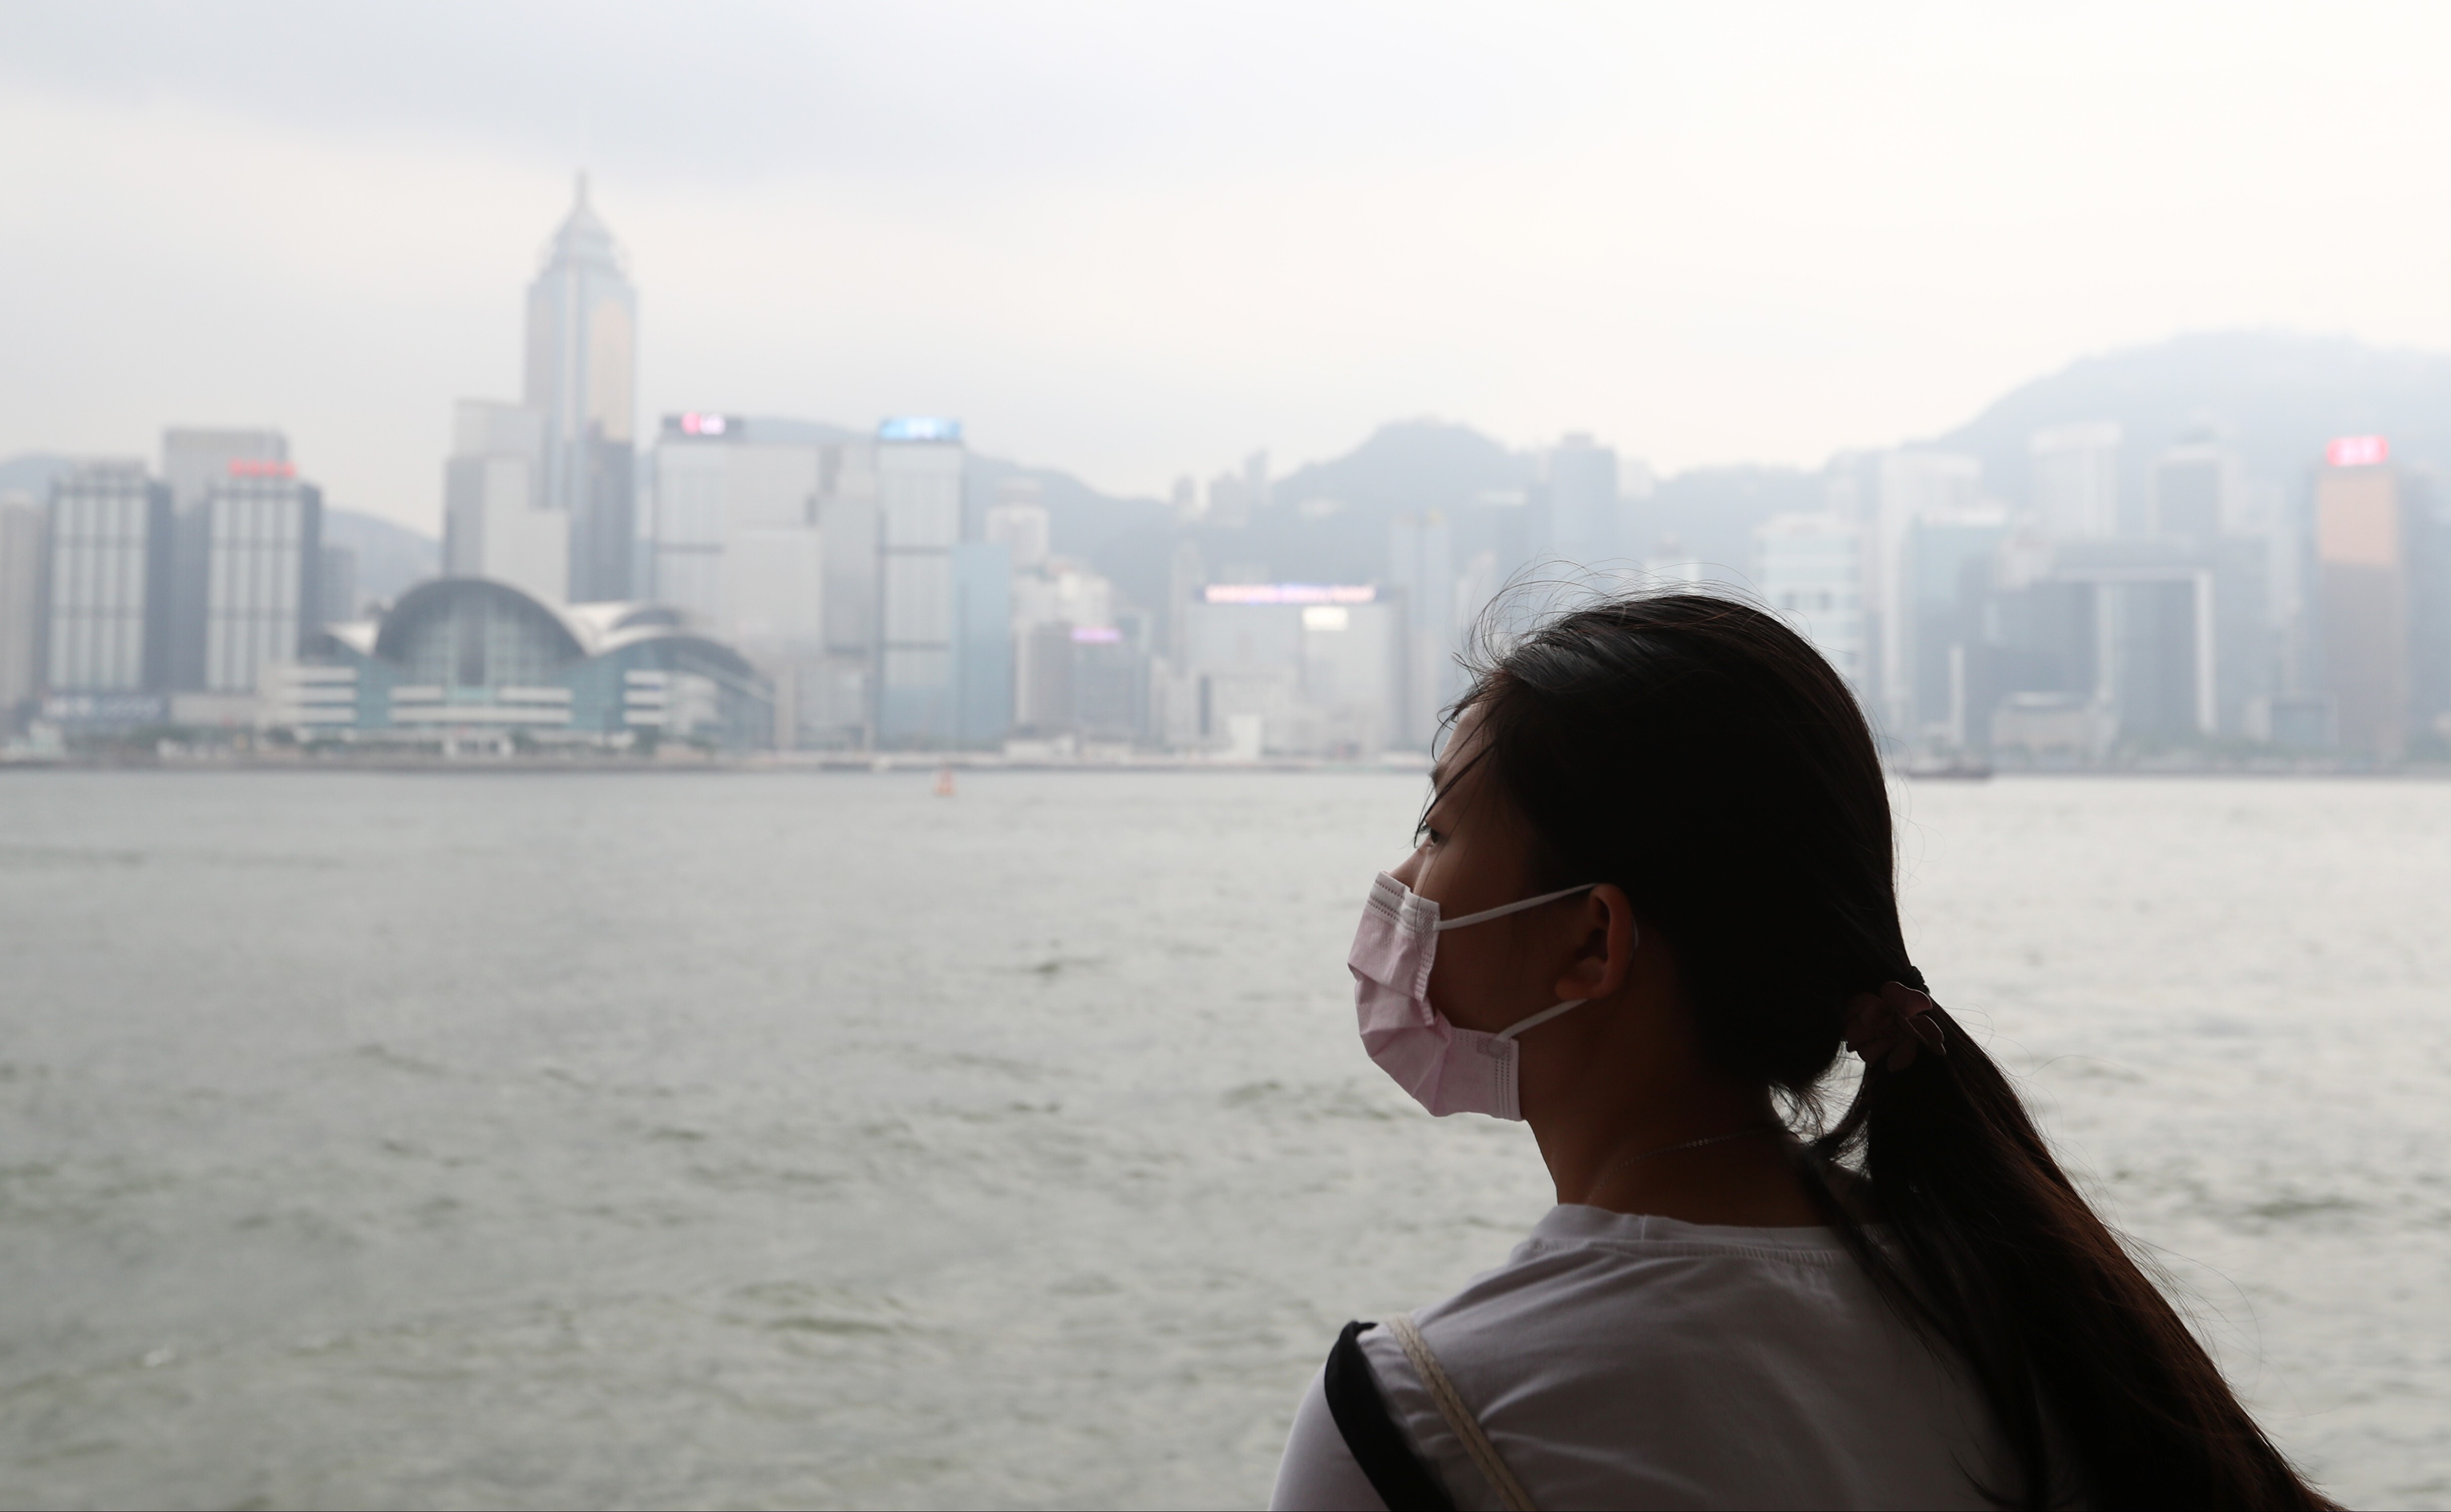 A woman wearing a face mask looks across Victoria Harbour as the Hong Kong skyline is obscured by smog on August 26, 2018. Photo: Nora Tam